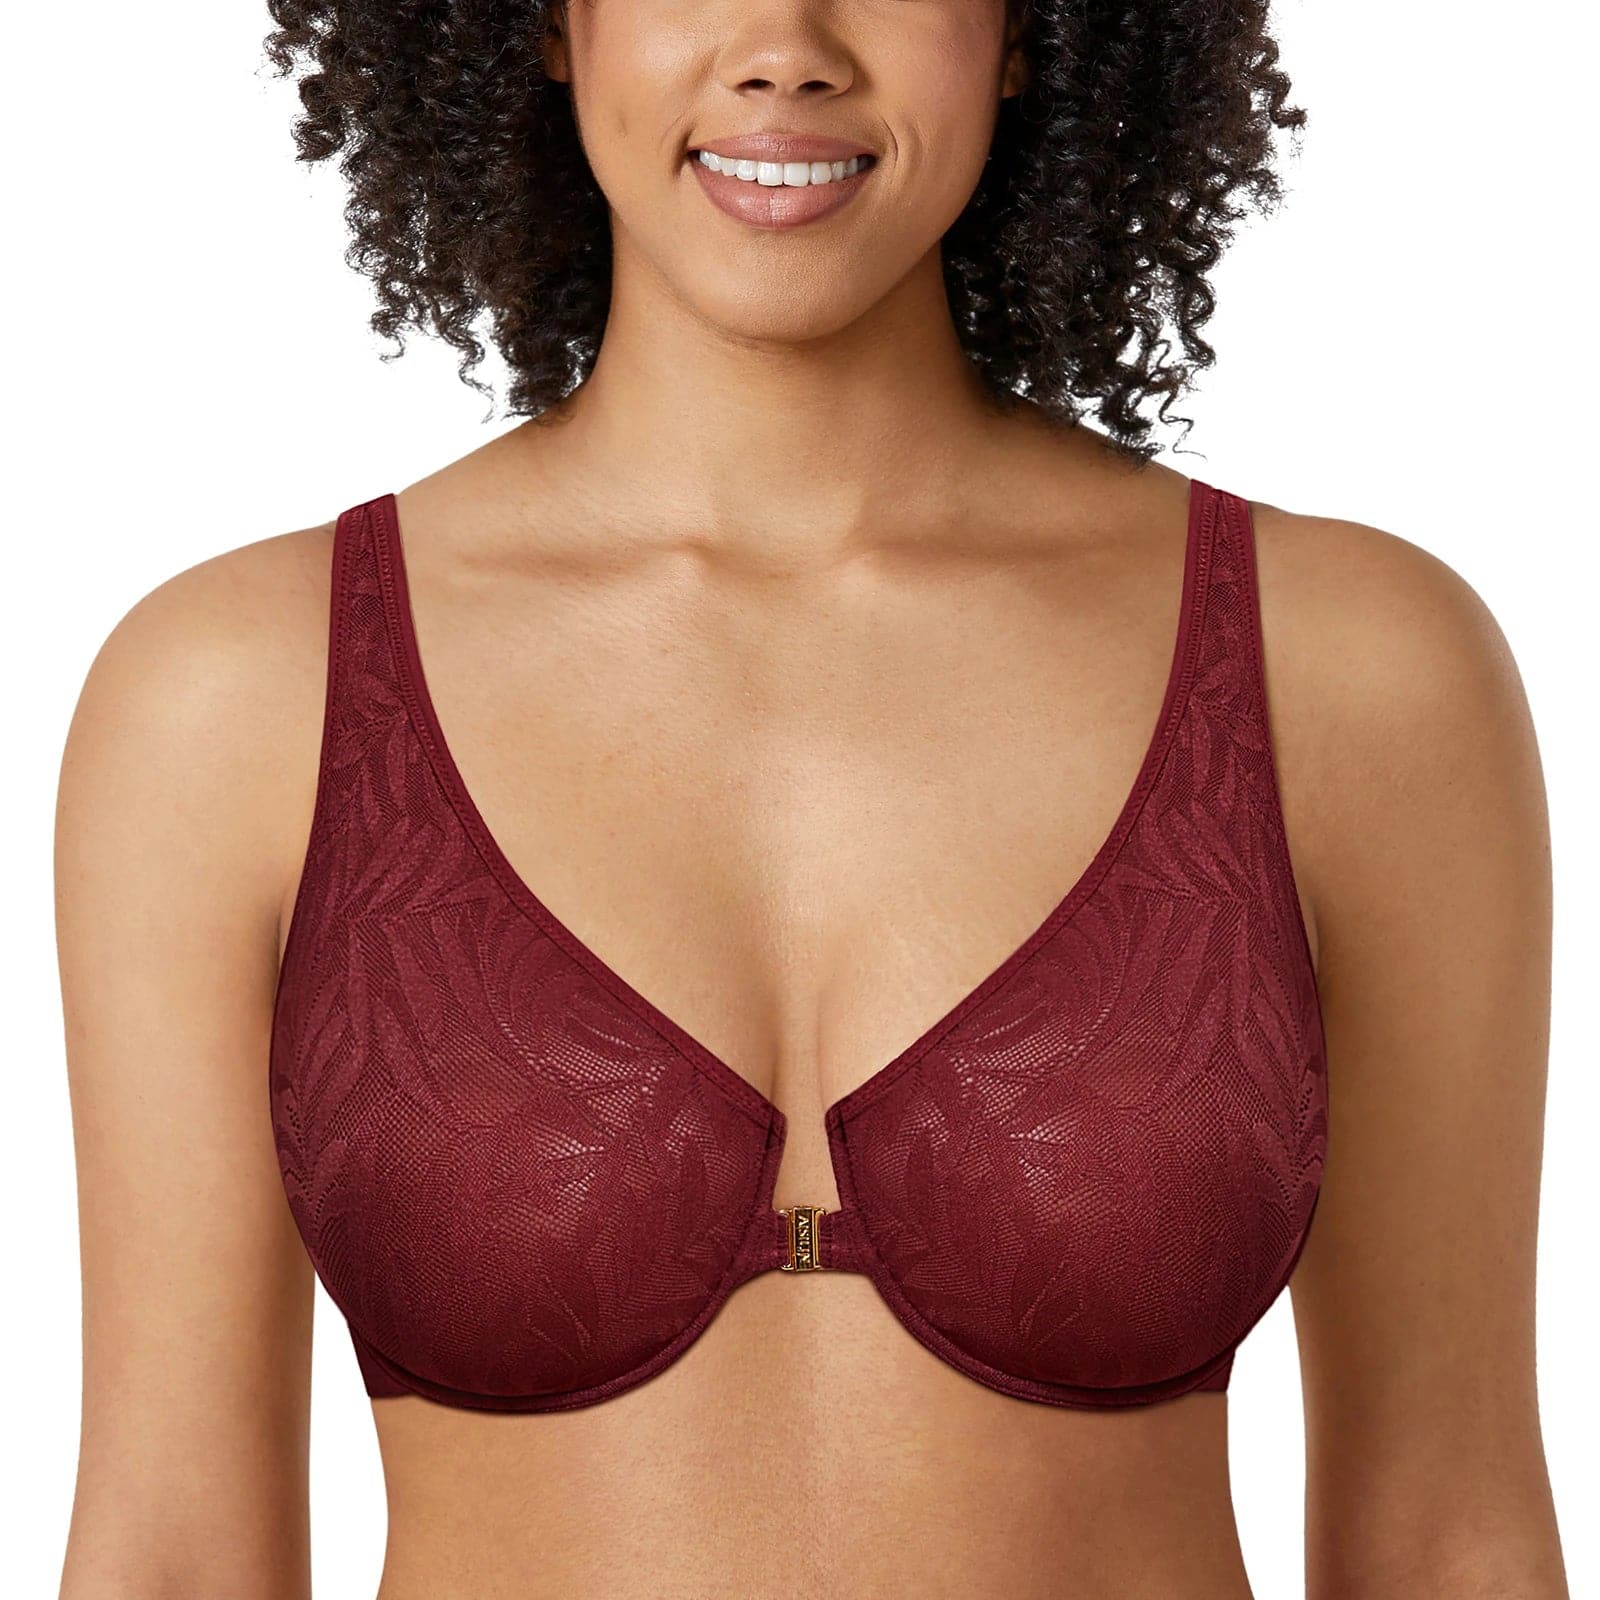 Soft Plunge Front Closure Bras - Smooth Floral Lace, Underwire, Full Cup, Thin Mold Cup - AISILIN - Wandering Woman